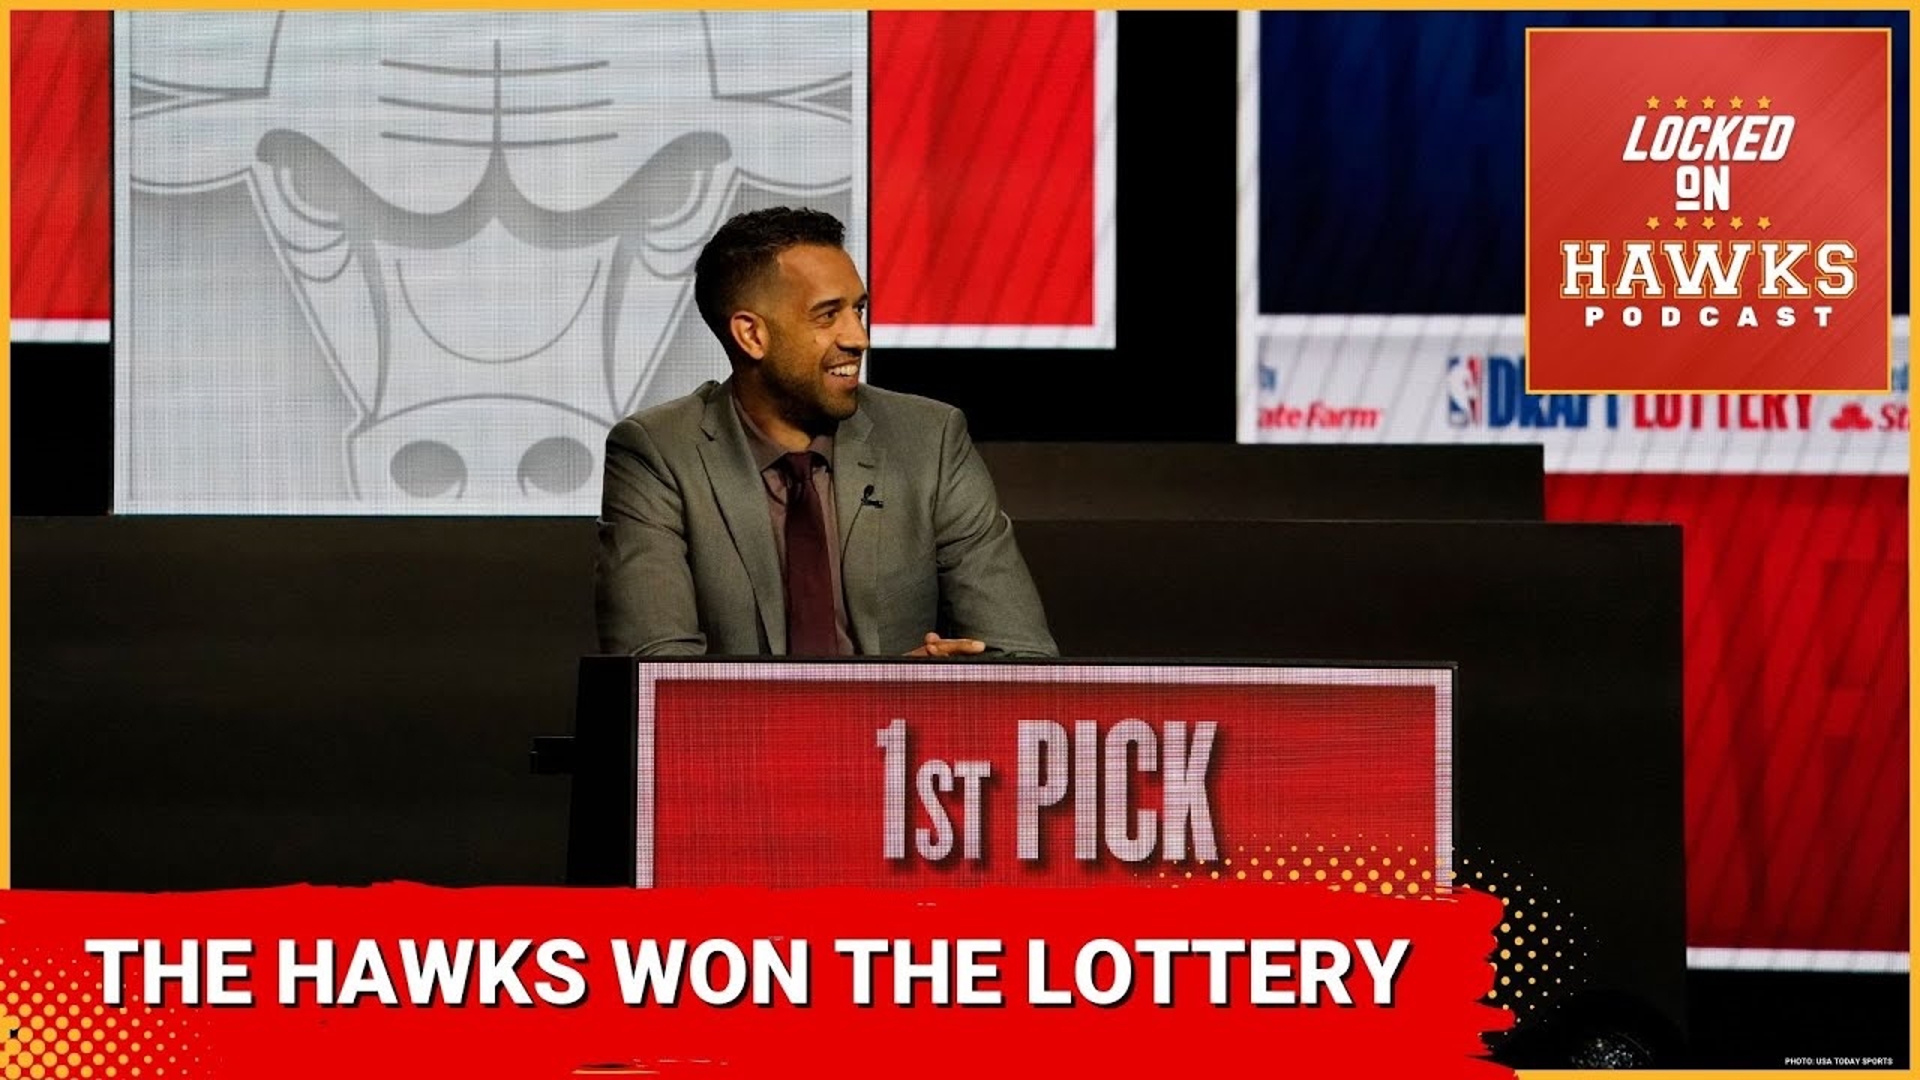 The show arrives in emergency fashion to react to the Atlanta Hawks winning the 2024 NBA Draft Lottery and entering the draft with the No. 1 overall pick.